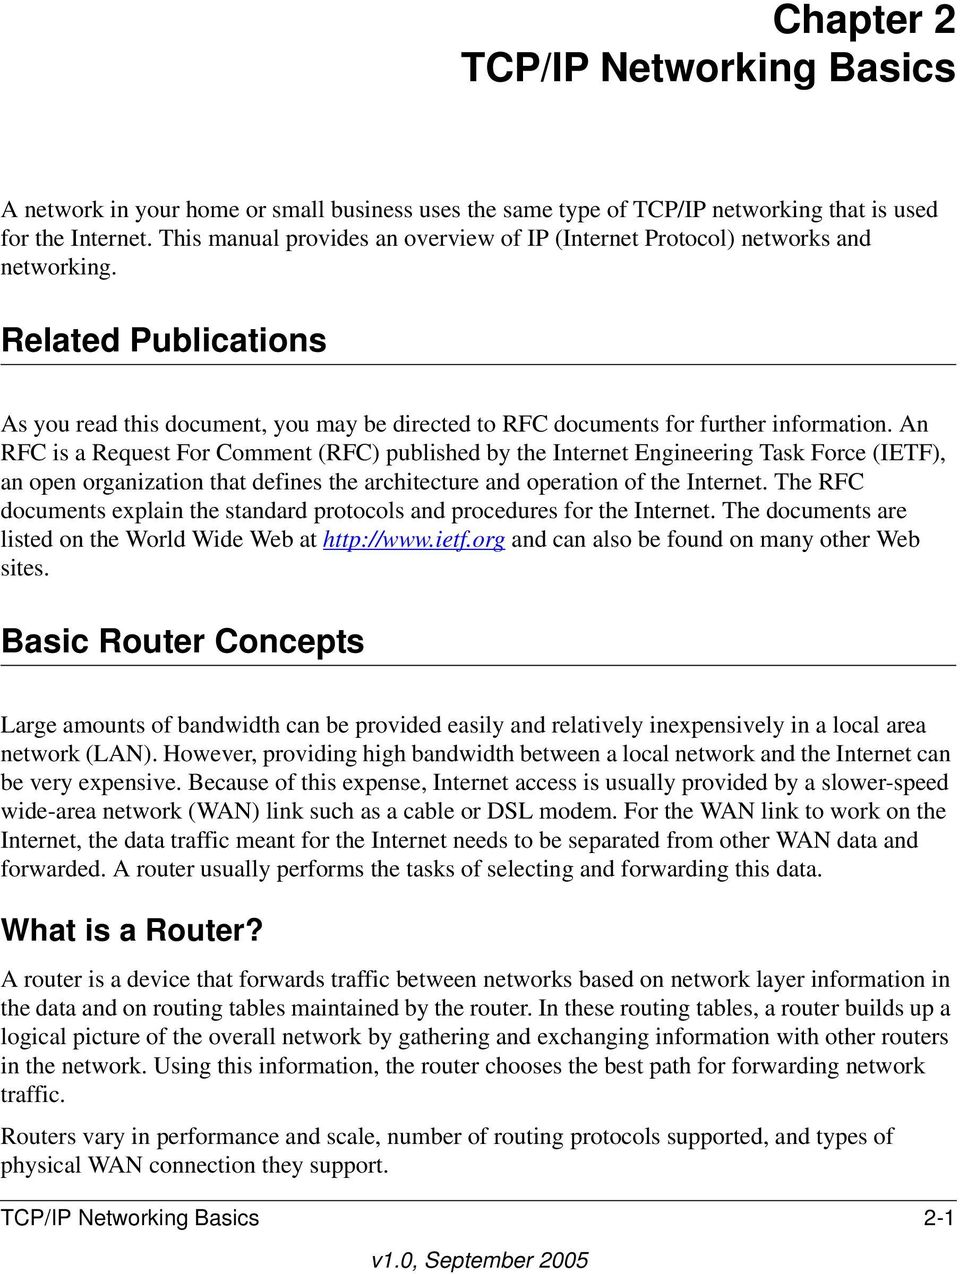 An RFC is a Request For Comment (RFC) published by the Internet Engineering Task Force (IETF), an open organization that defines the architecture and operation of the Internet.